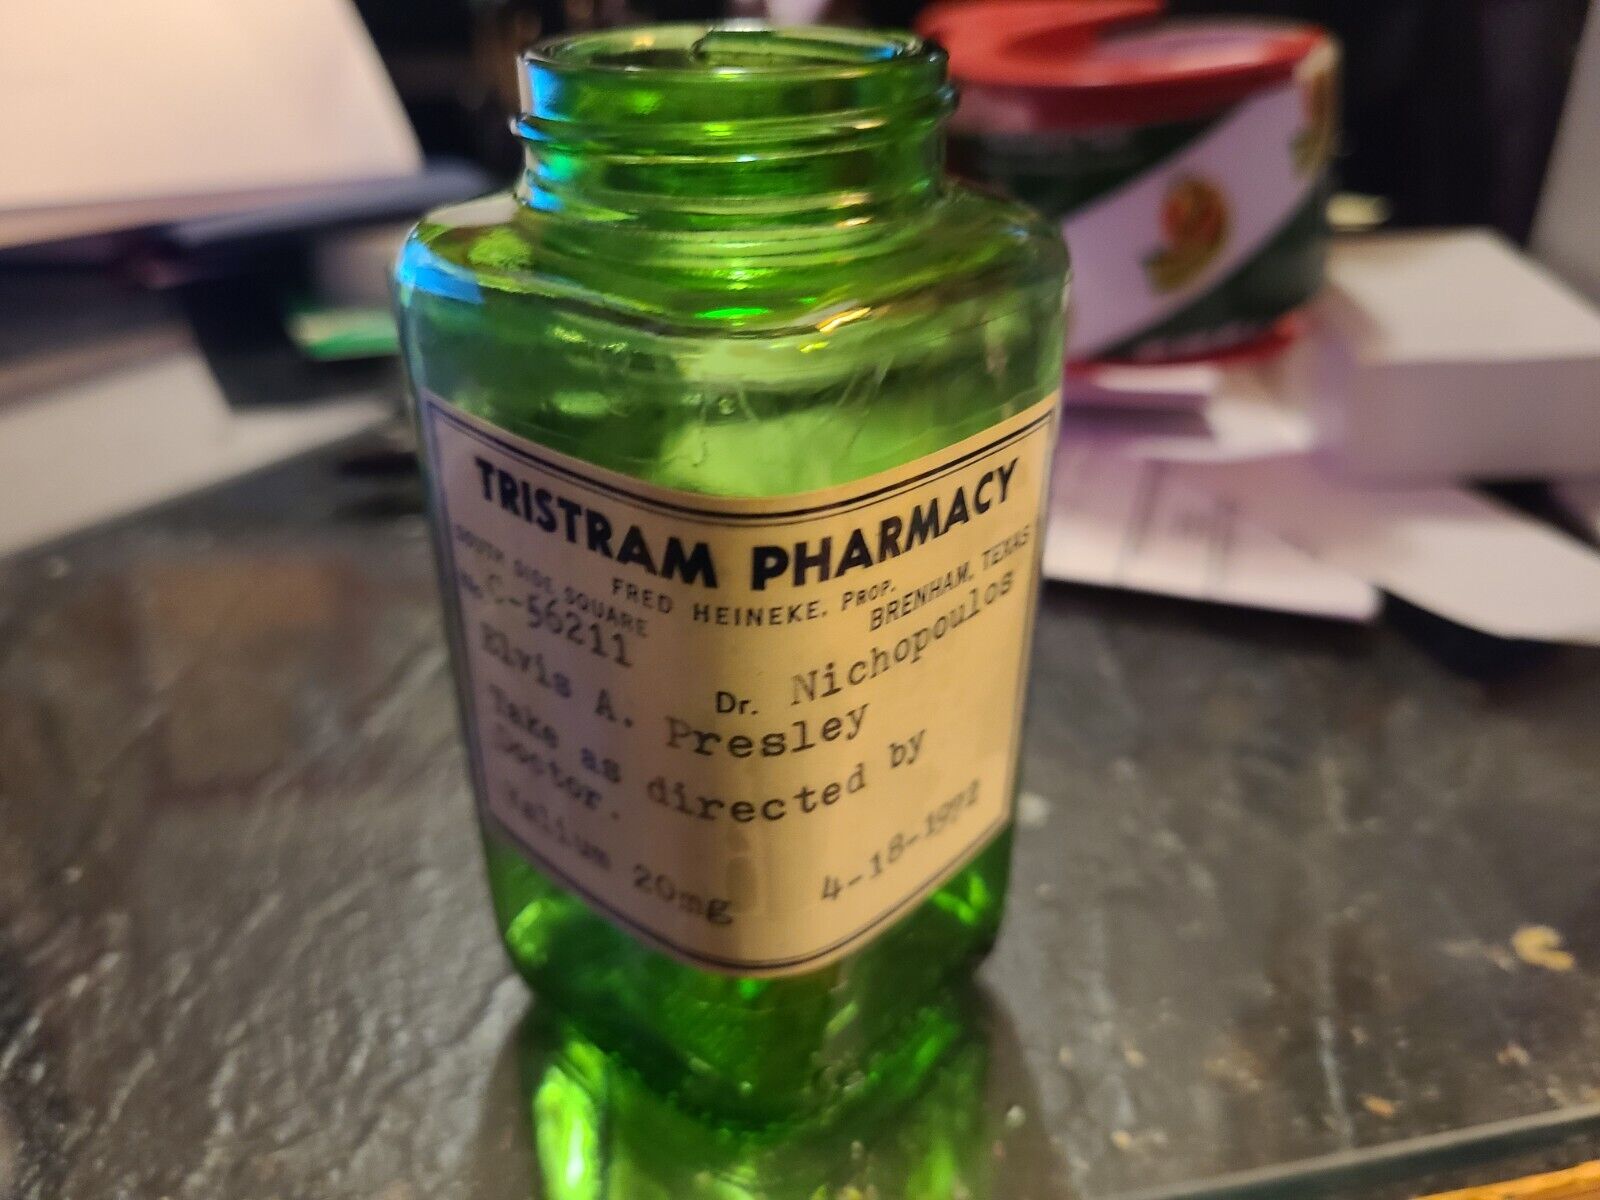 Elvis Presley Owned &Used empty bottle of Valium from 4-18-1972  Dr \